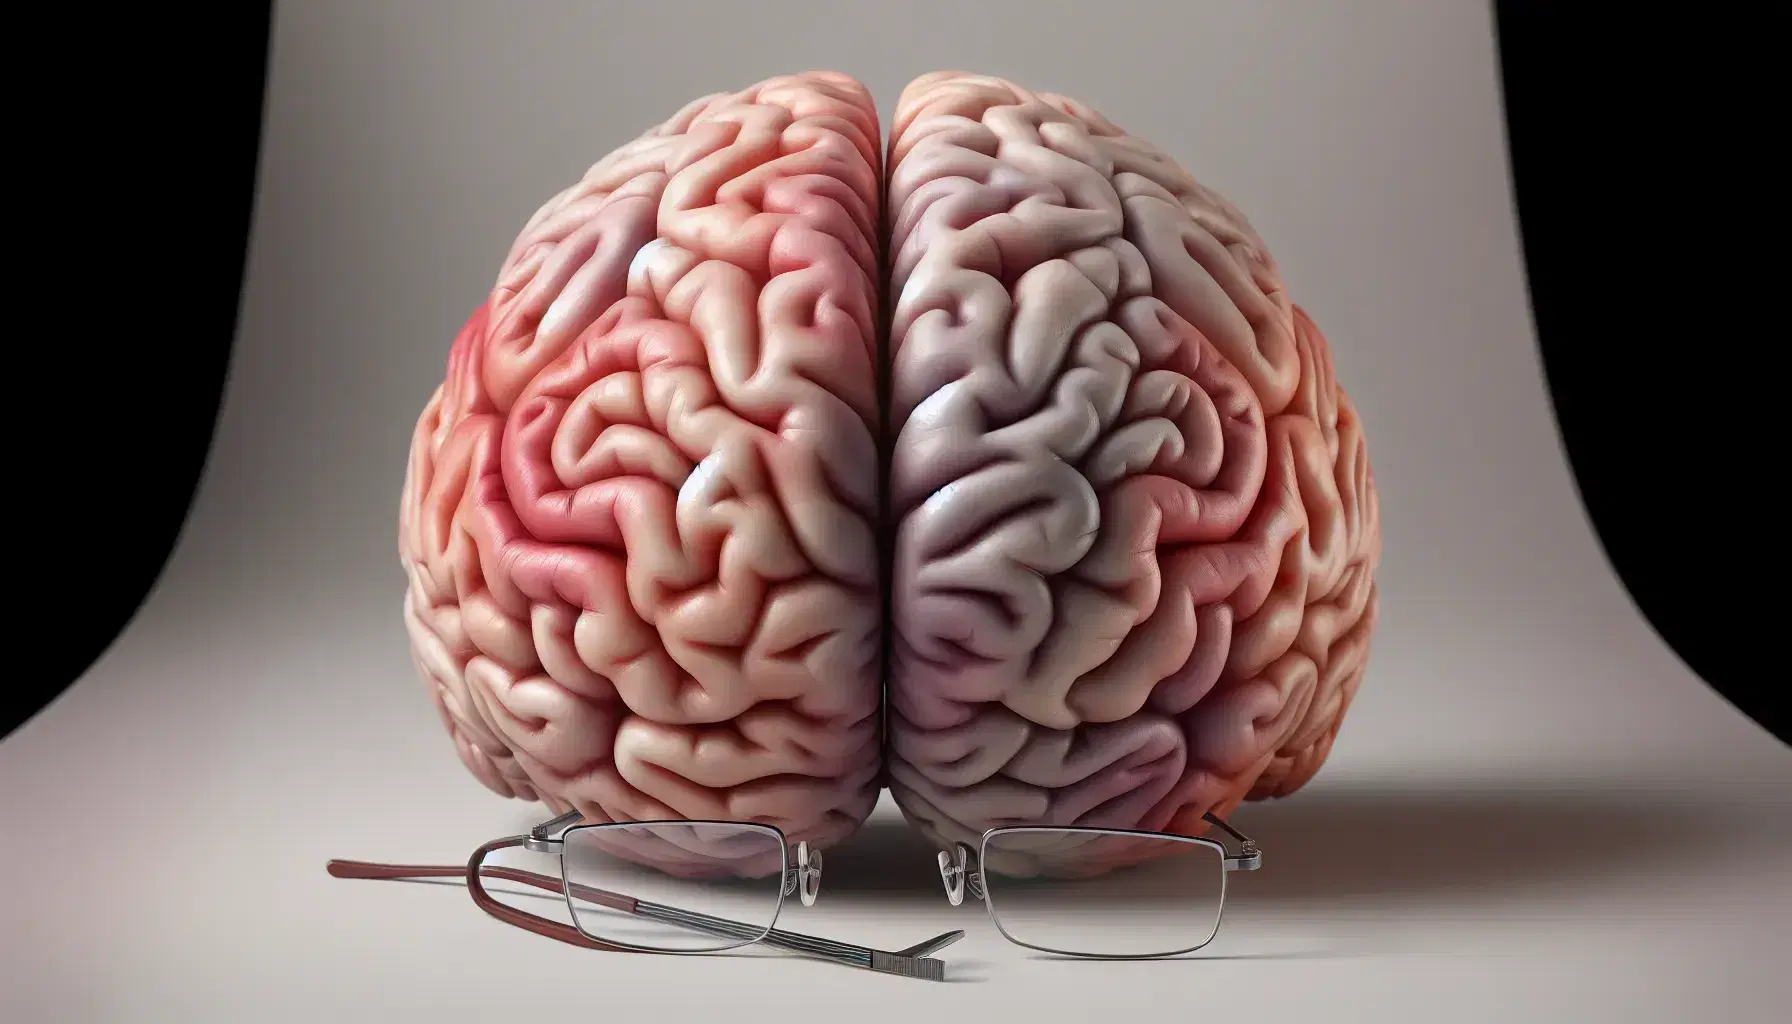 Detailed anatomical model of the human brain in the left hemisphere with metallic glasses in the foreground on a neutral background.